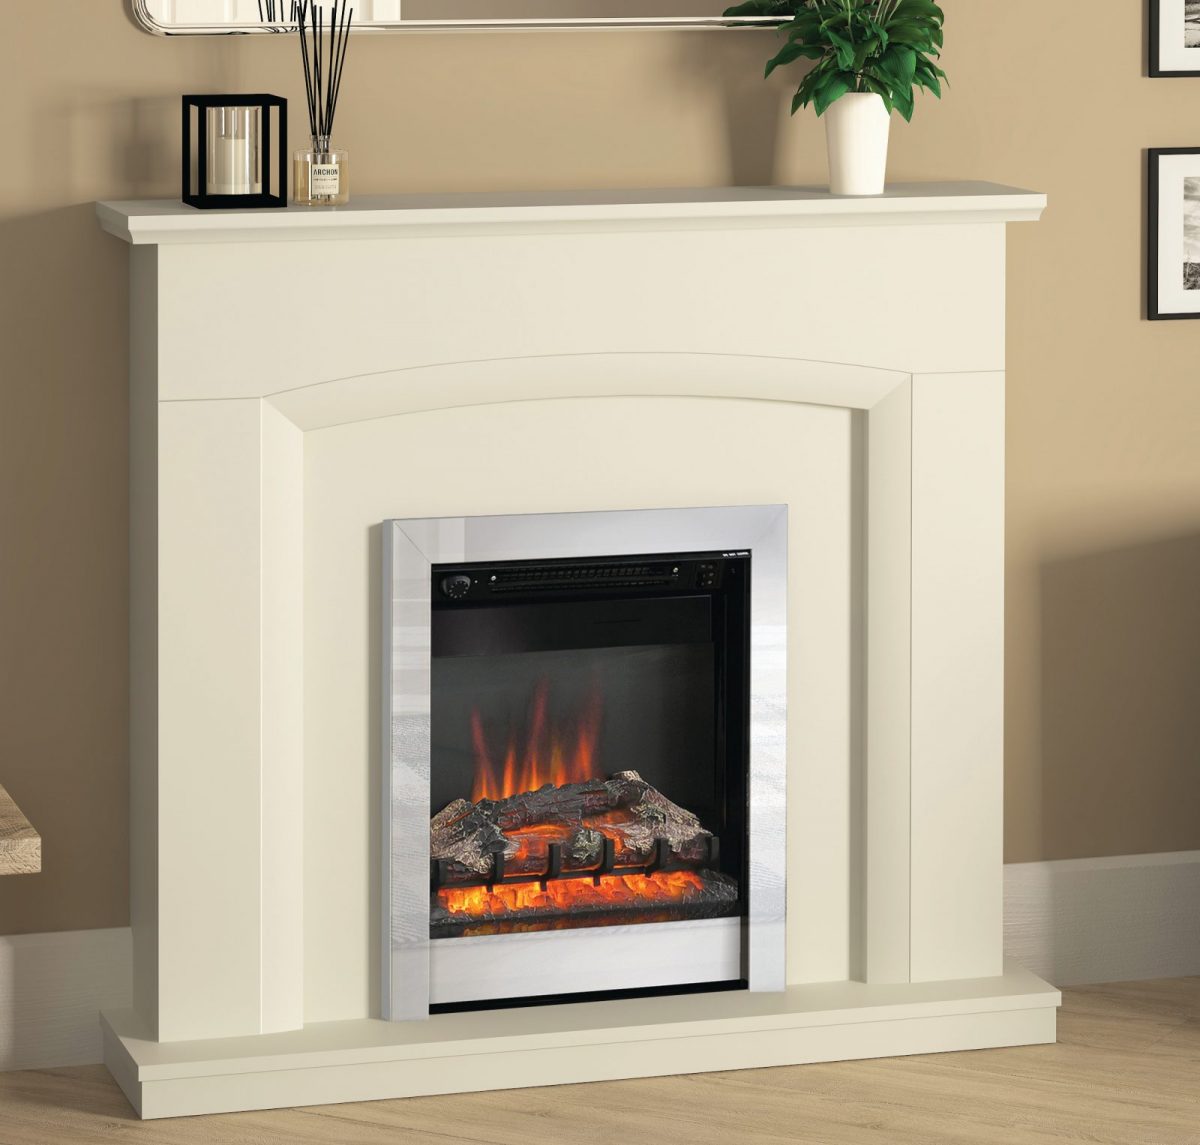 46″ Hayden fireplace in Soft White finish chrome Finish Electric Fire